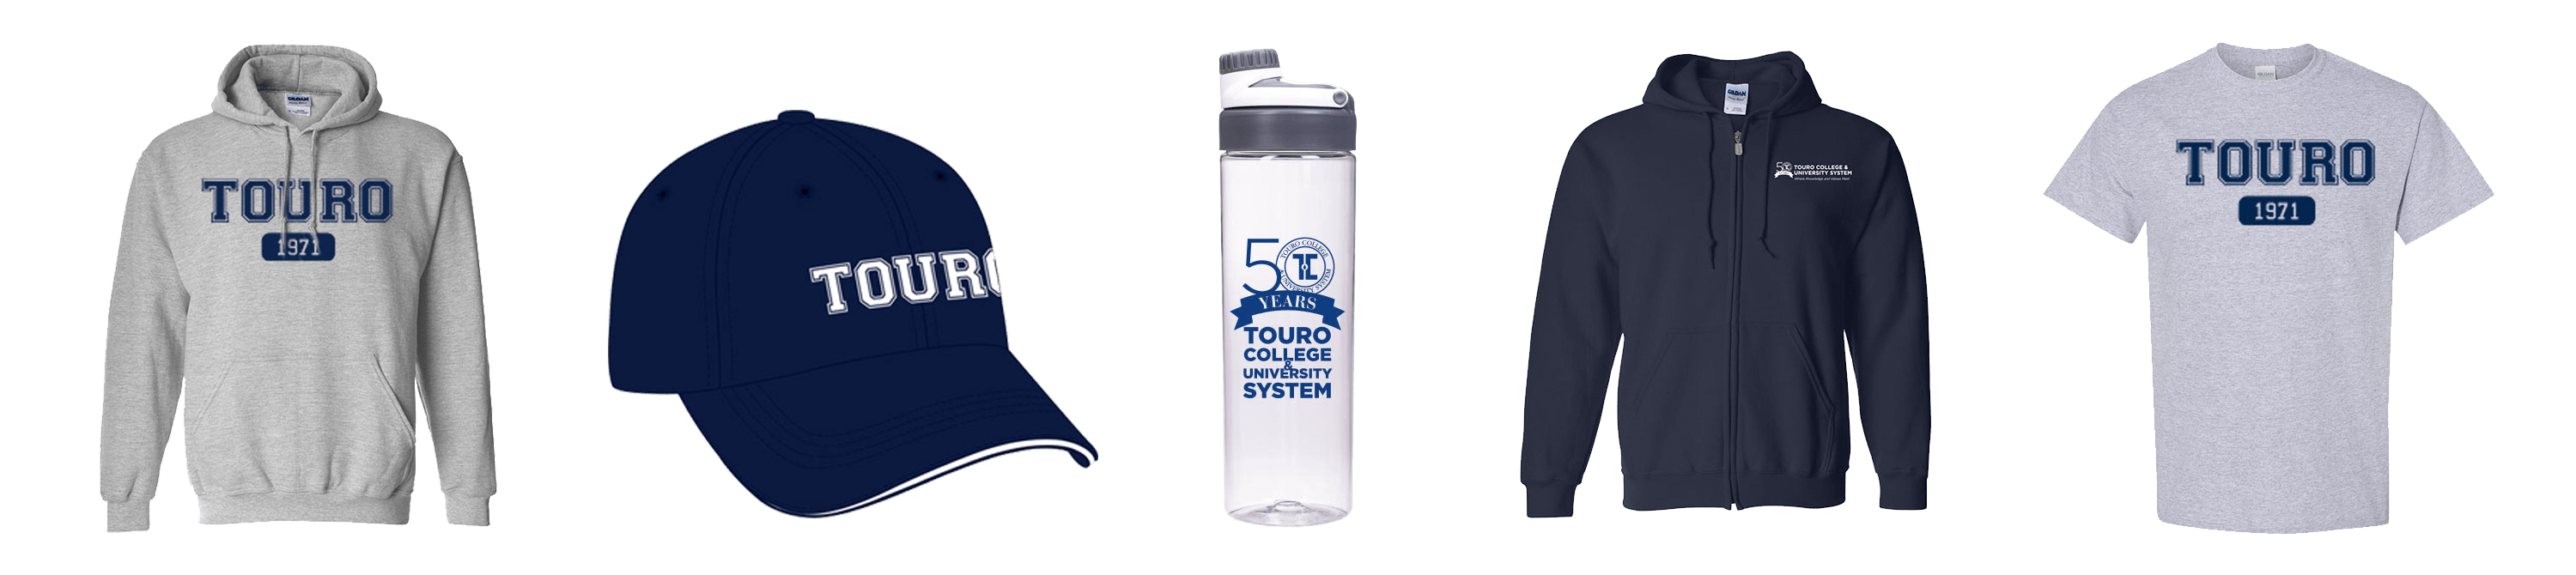 sweatshirts, t-shirts, hat and water bottle with the touro logo